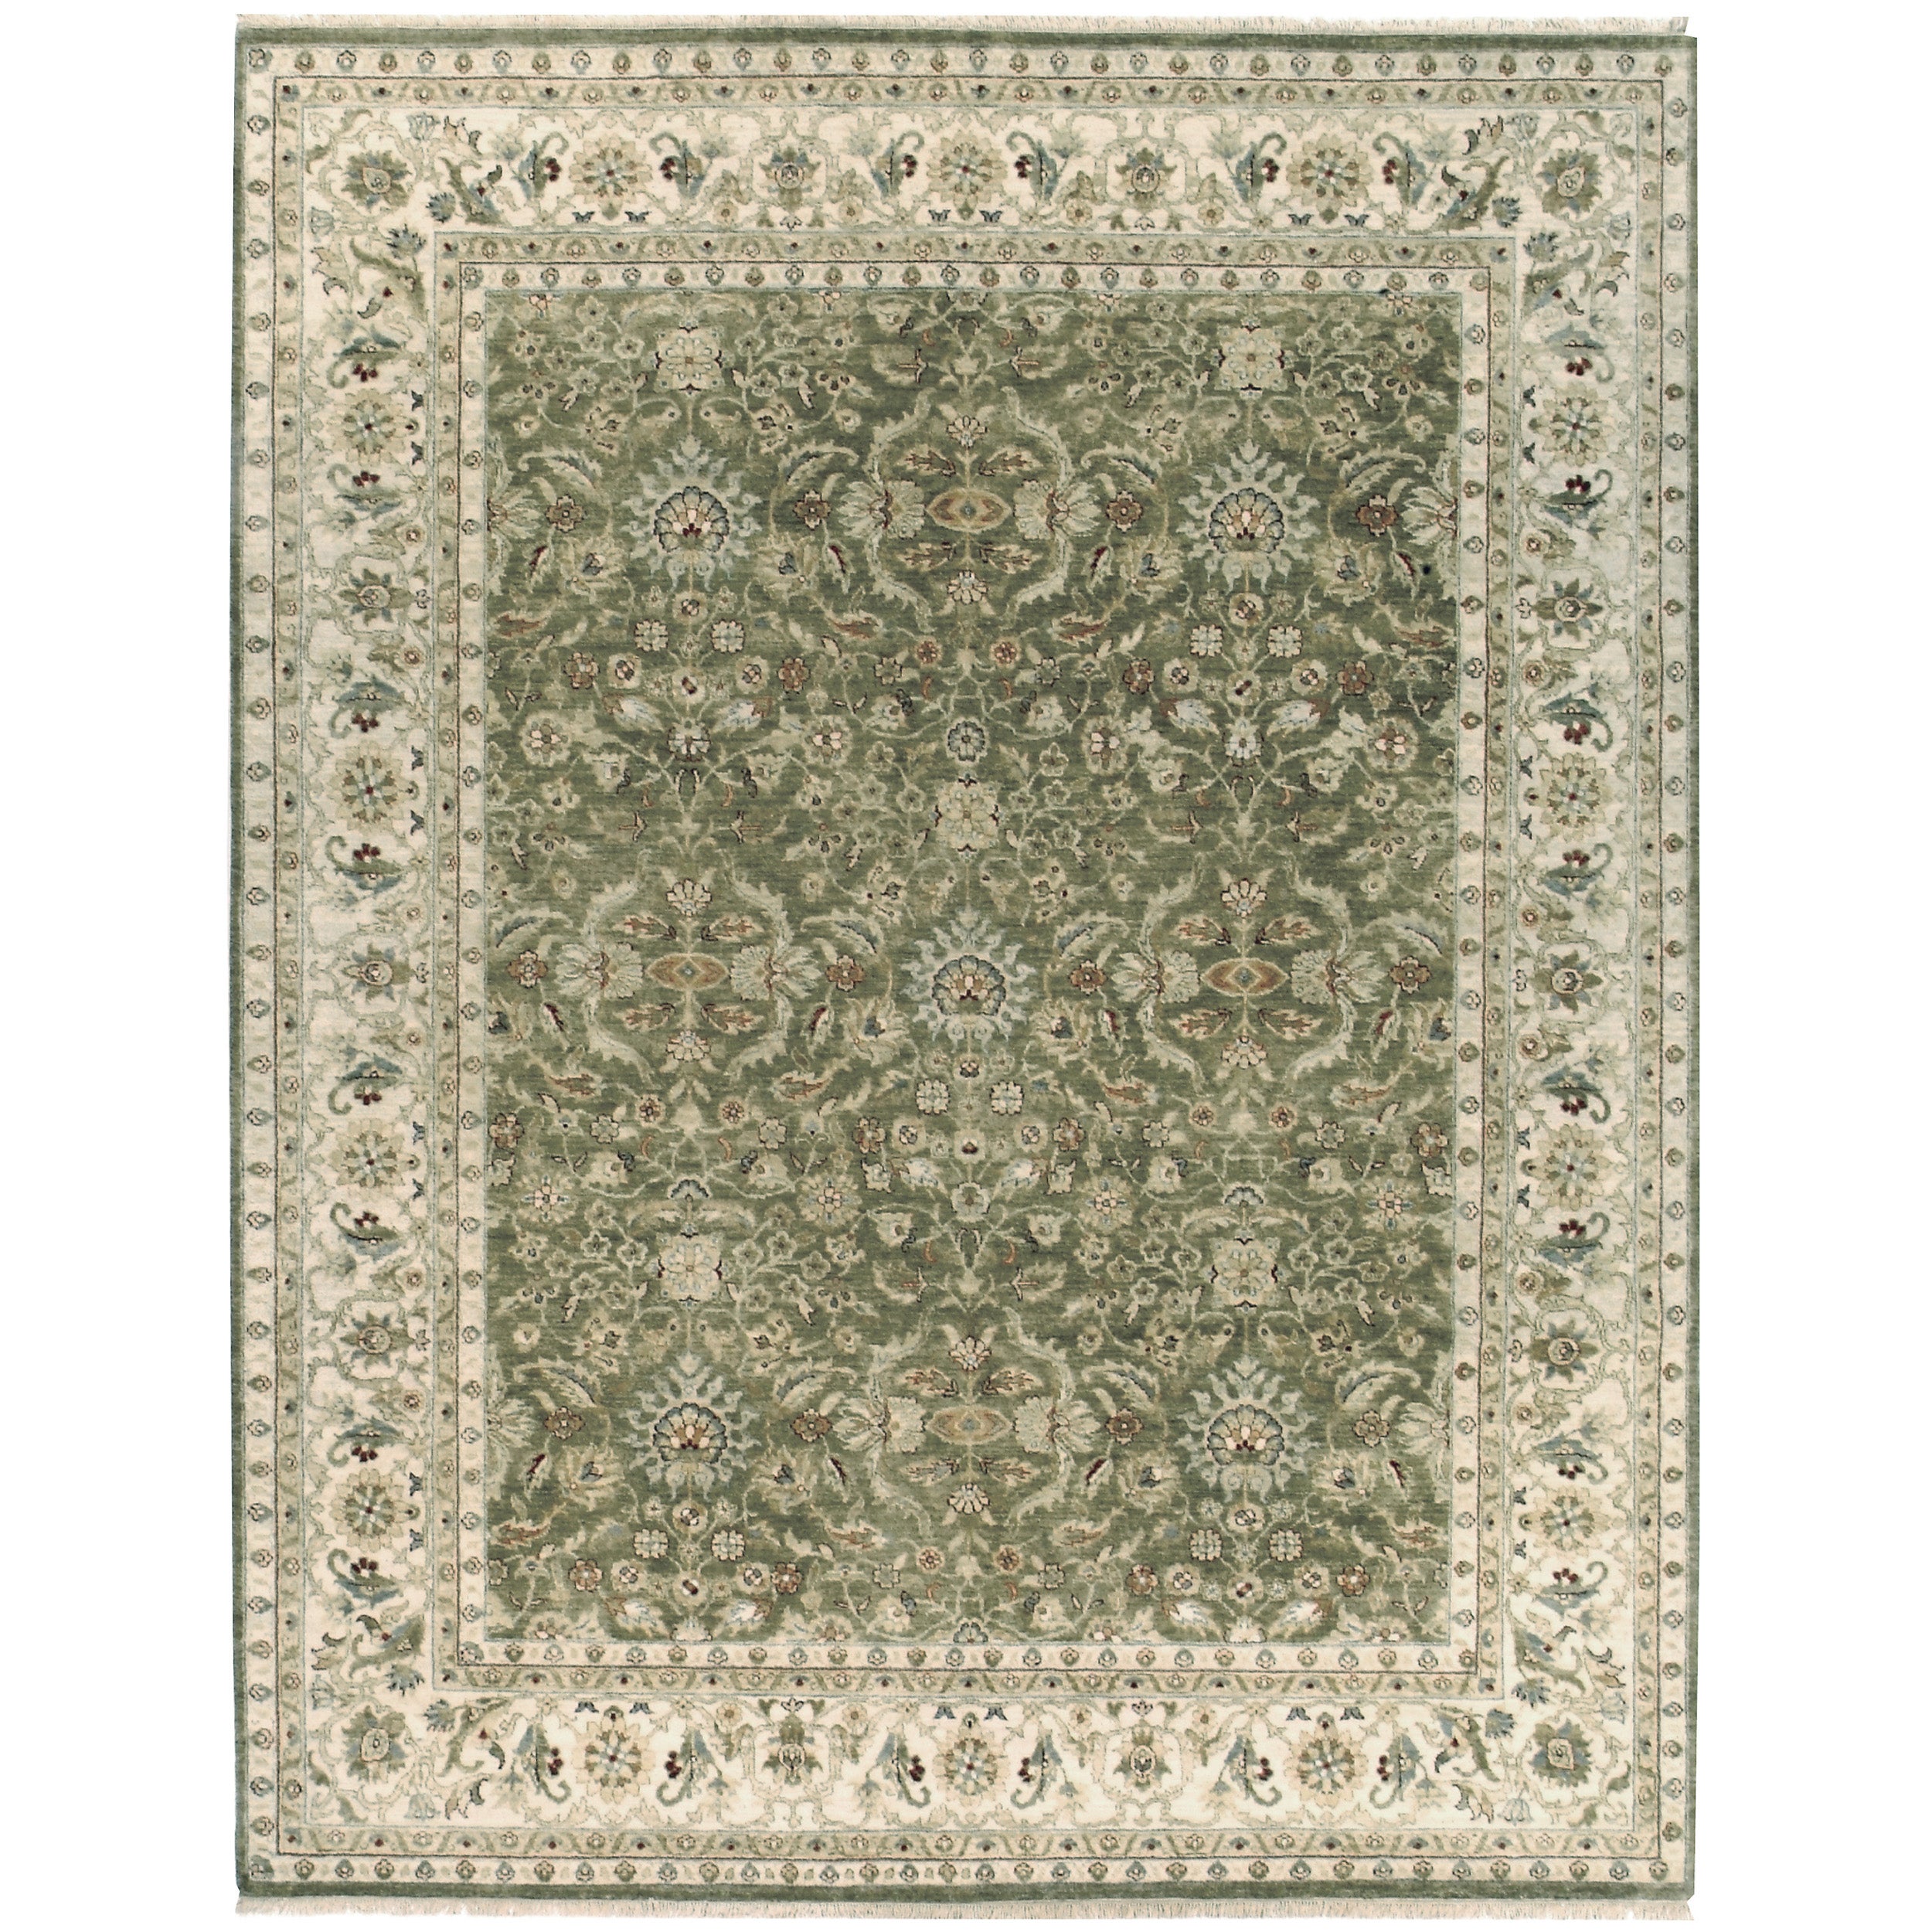 Luxury Traditional Hand-Knotted Olive/Ivory 12x24 Rug